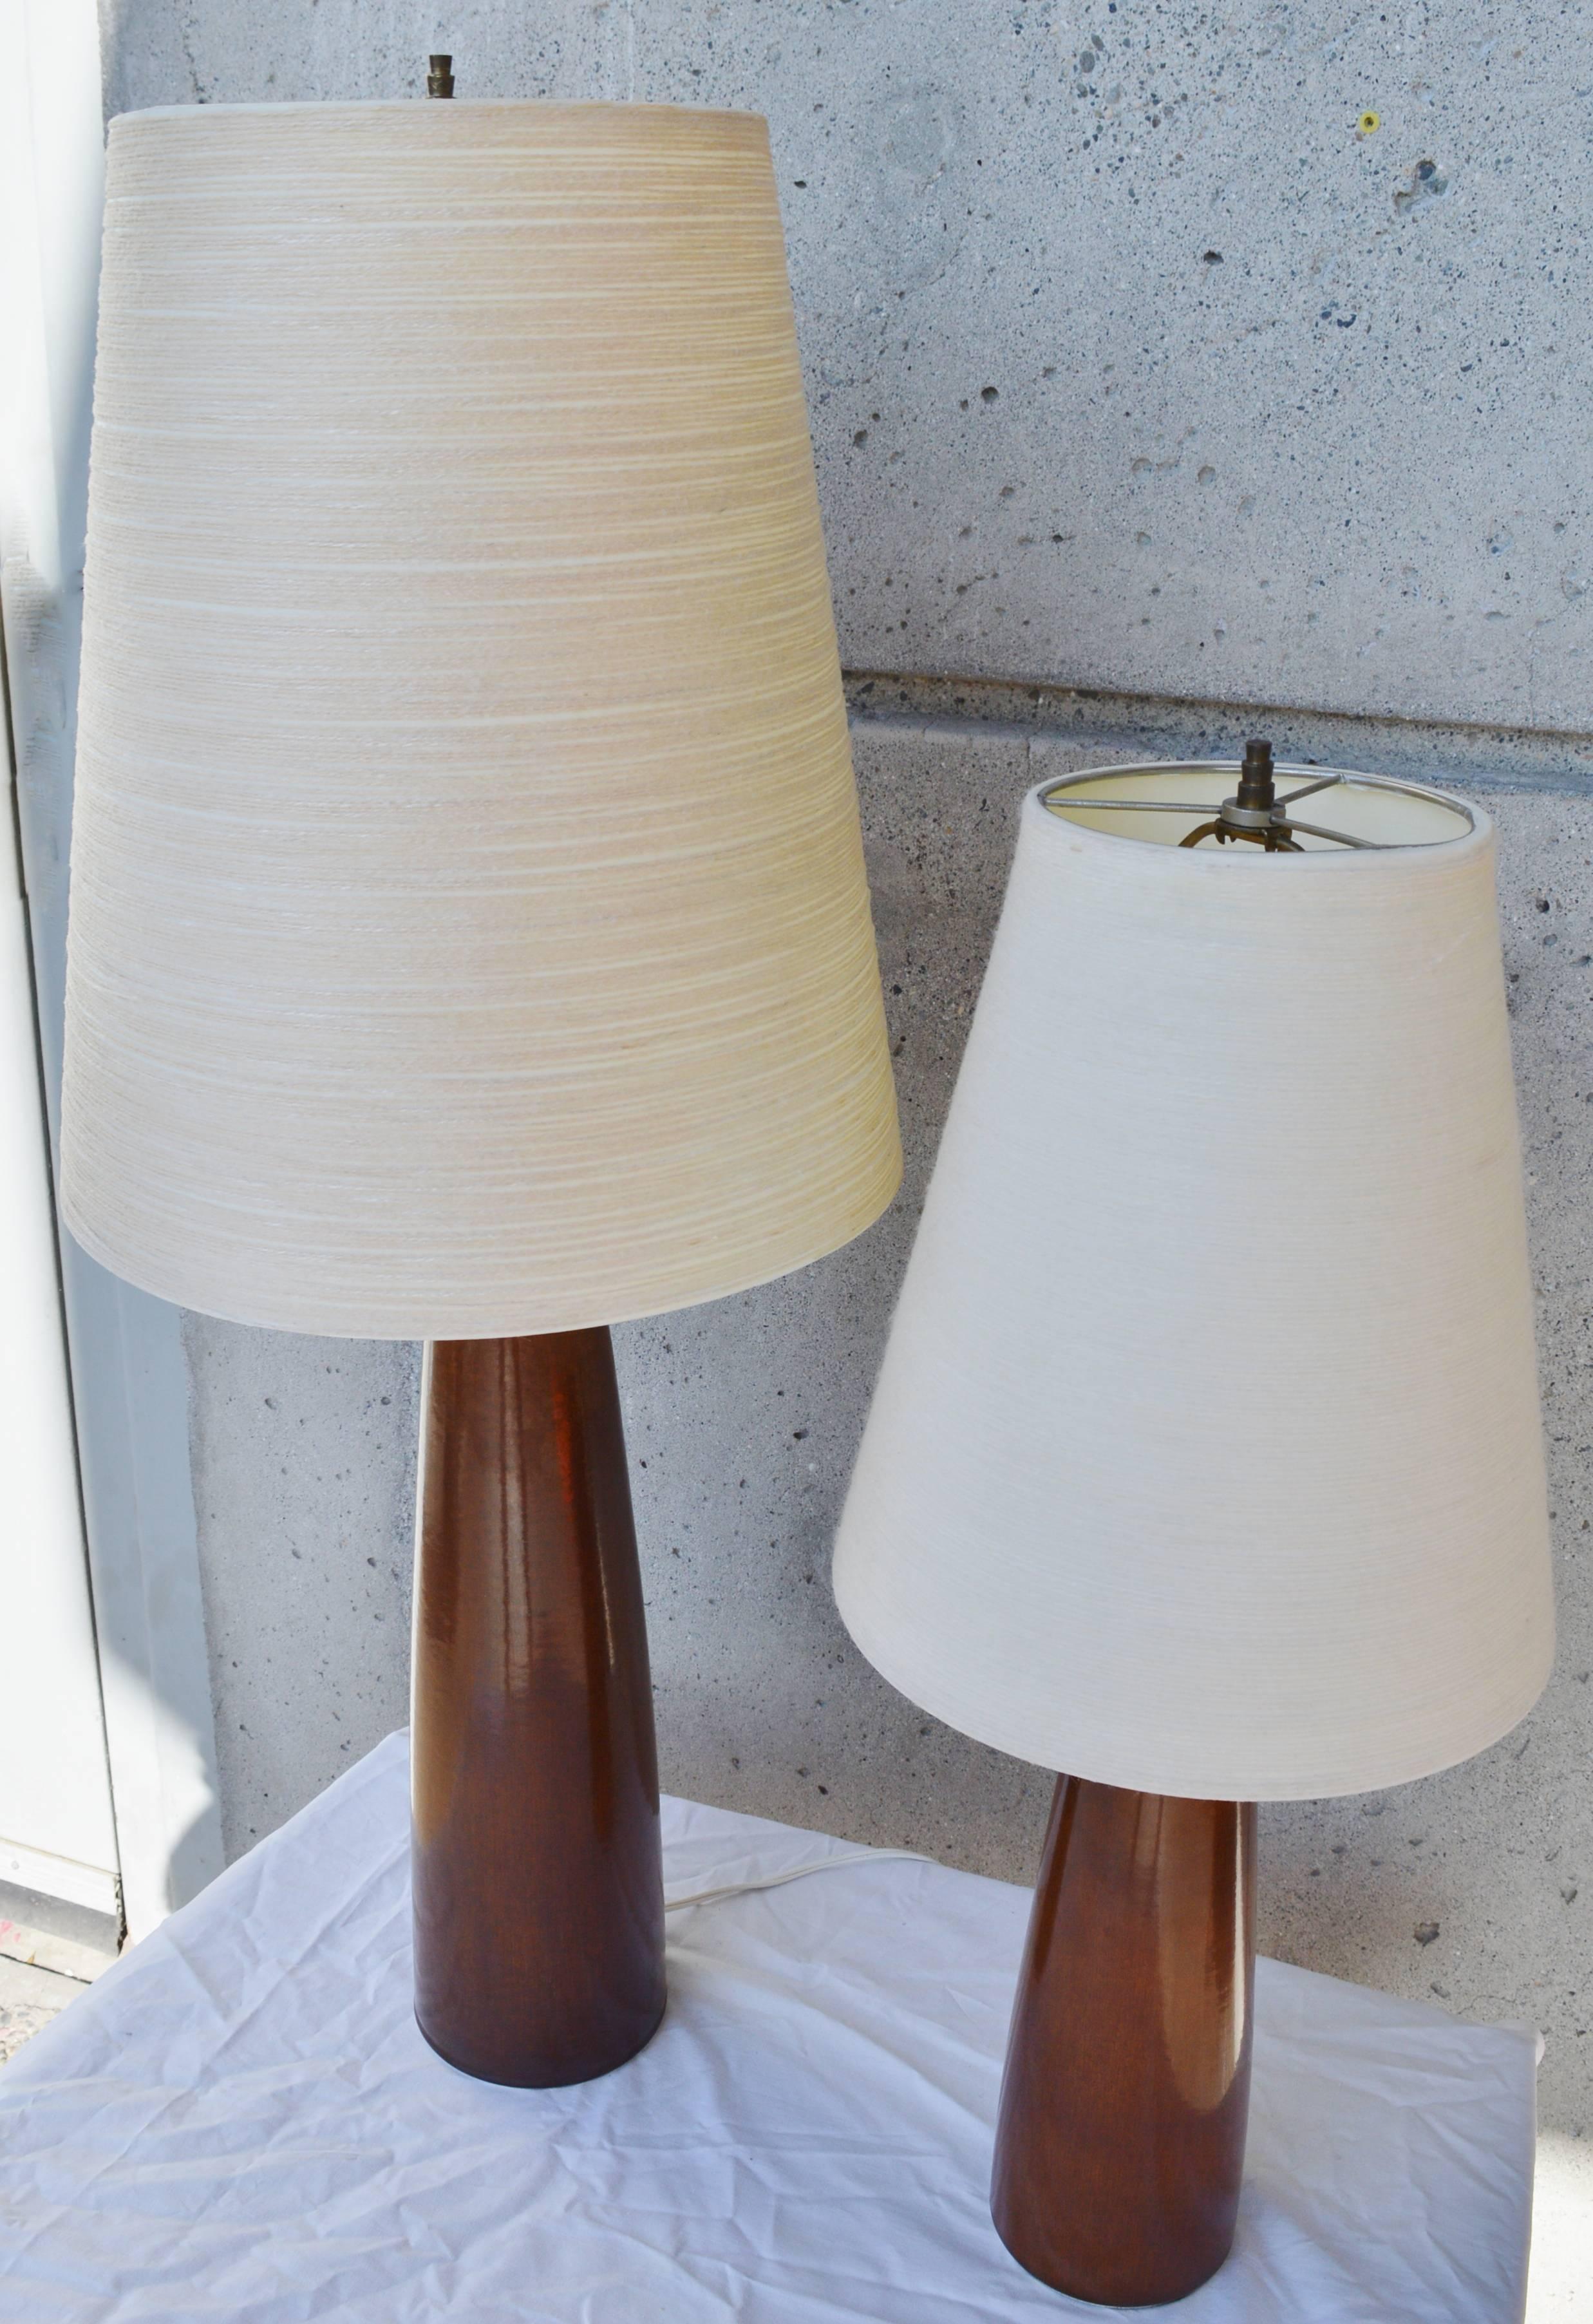 Pair of Lotte & Gunnar Bostlund Ceramic Lamps with Original Shades and Finials 1